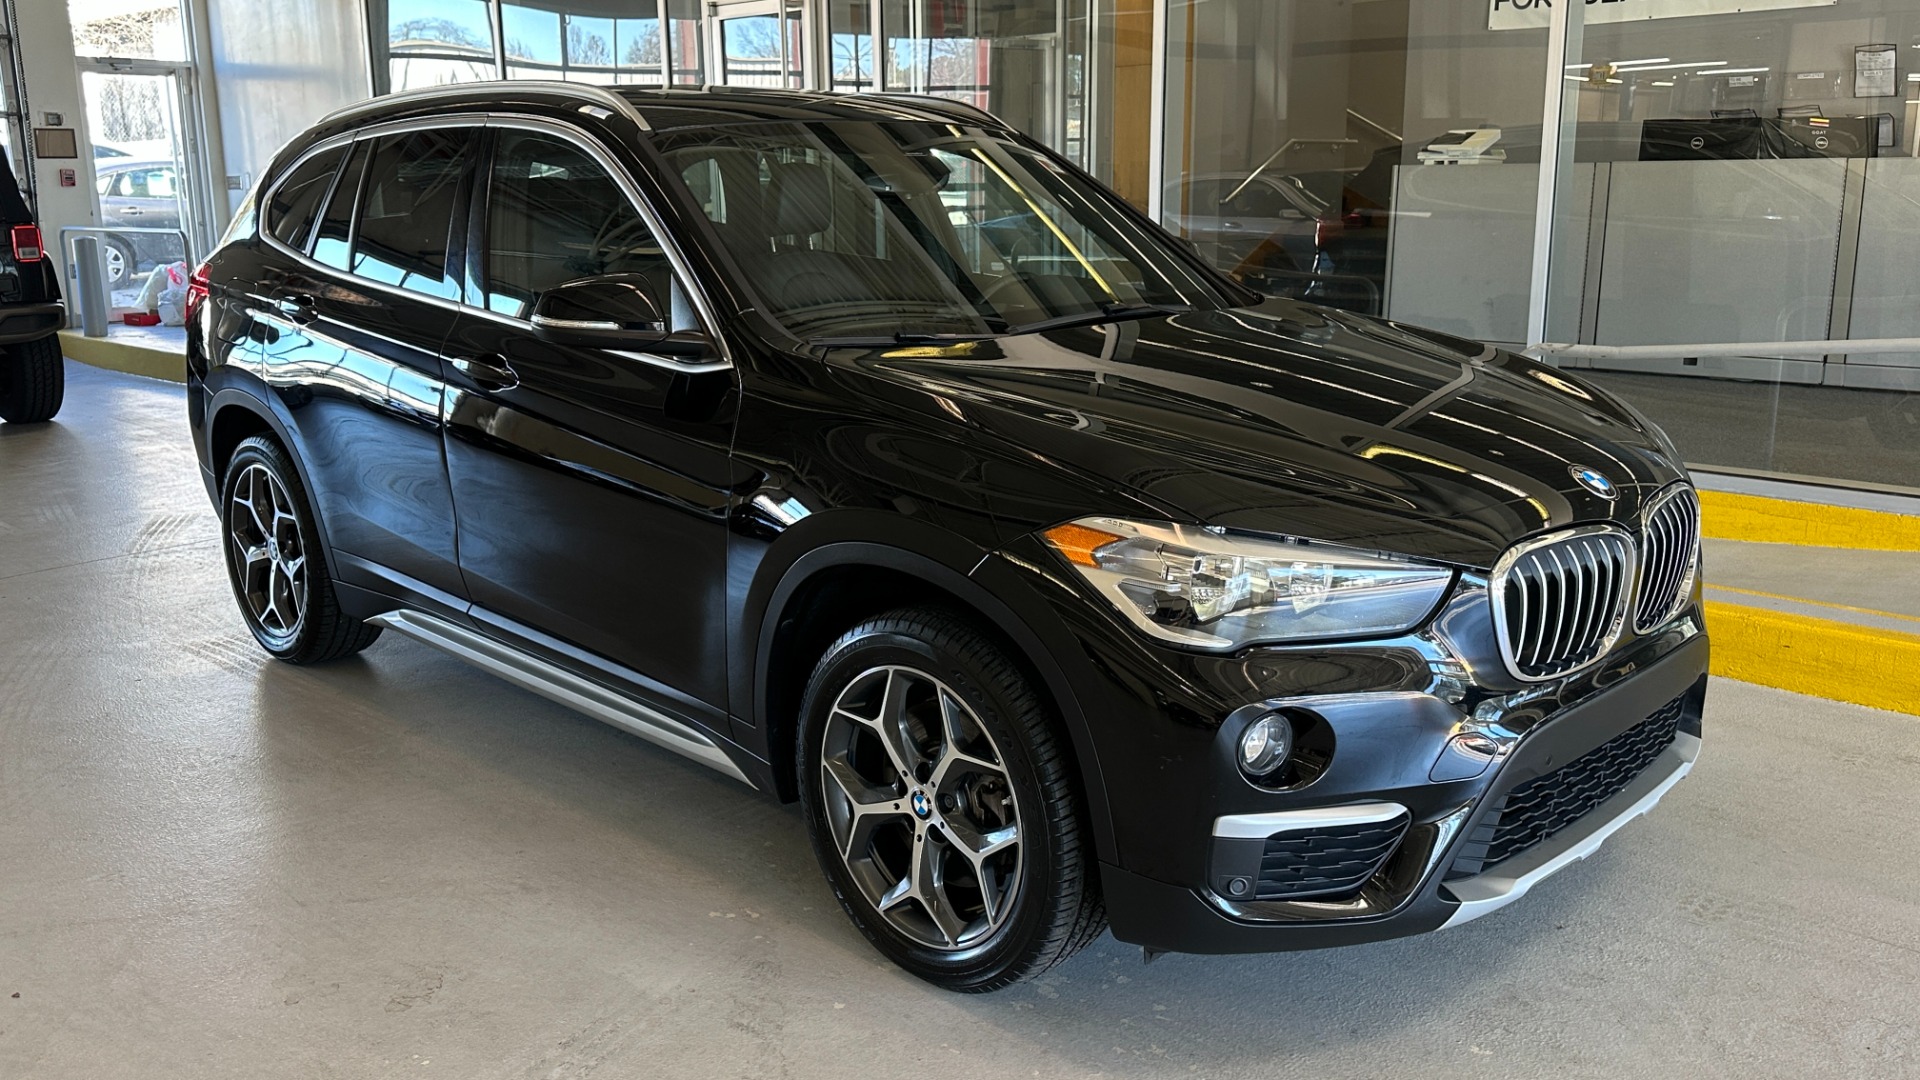 Used 2019 BMW X1 xDrive28i / CONVENIENCE PACKAGE / HEATED STEERING for sale $28,000 at Formula Imports in Charlotte NC 28227 2